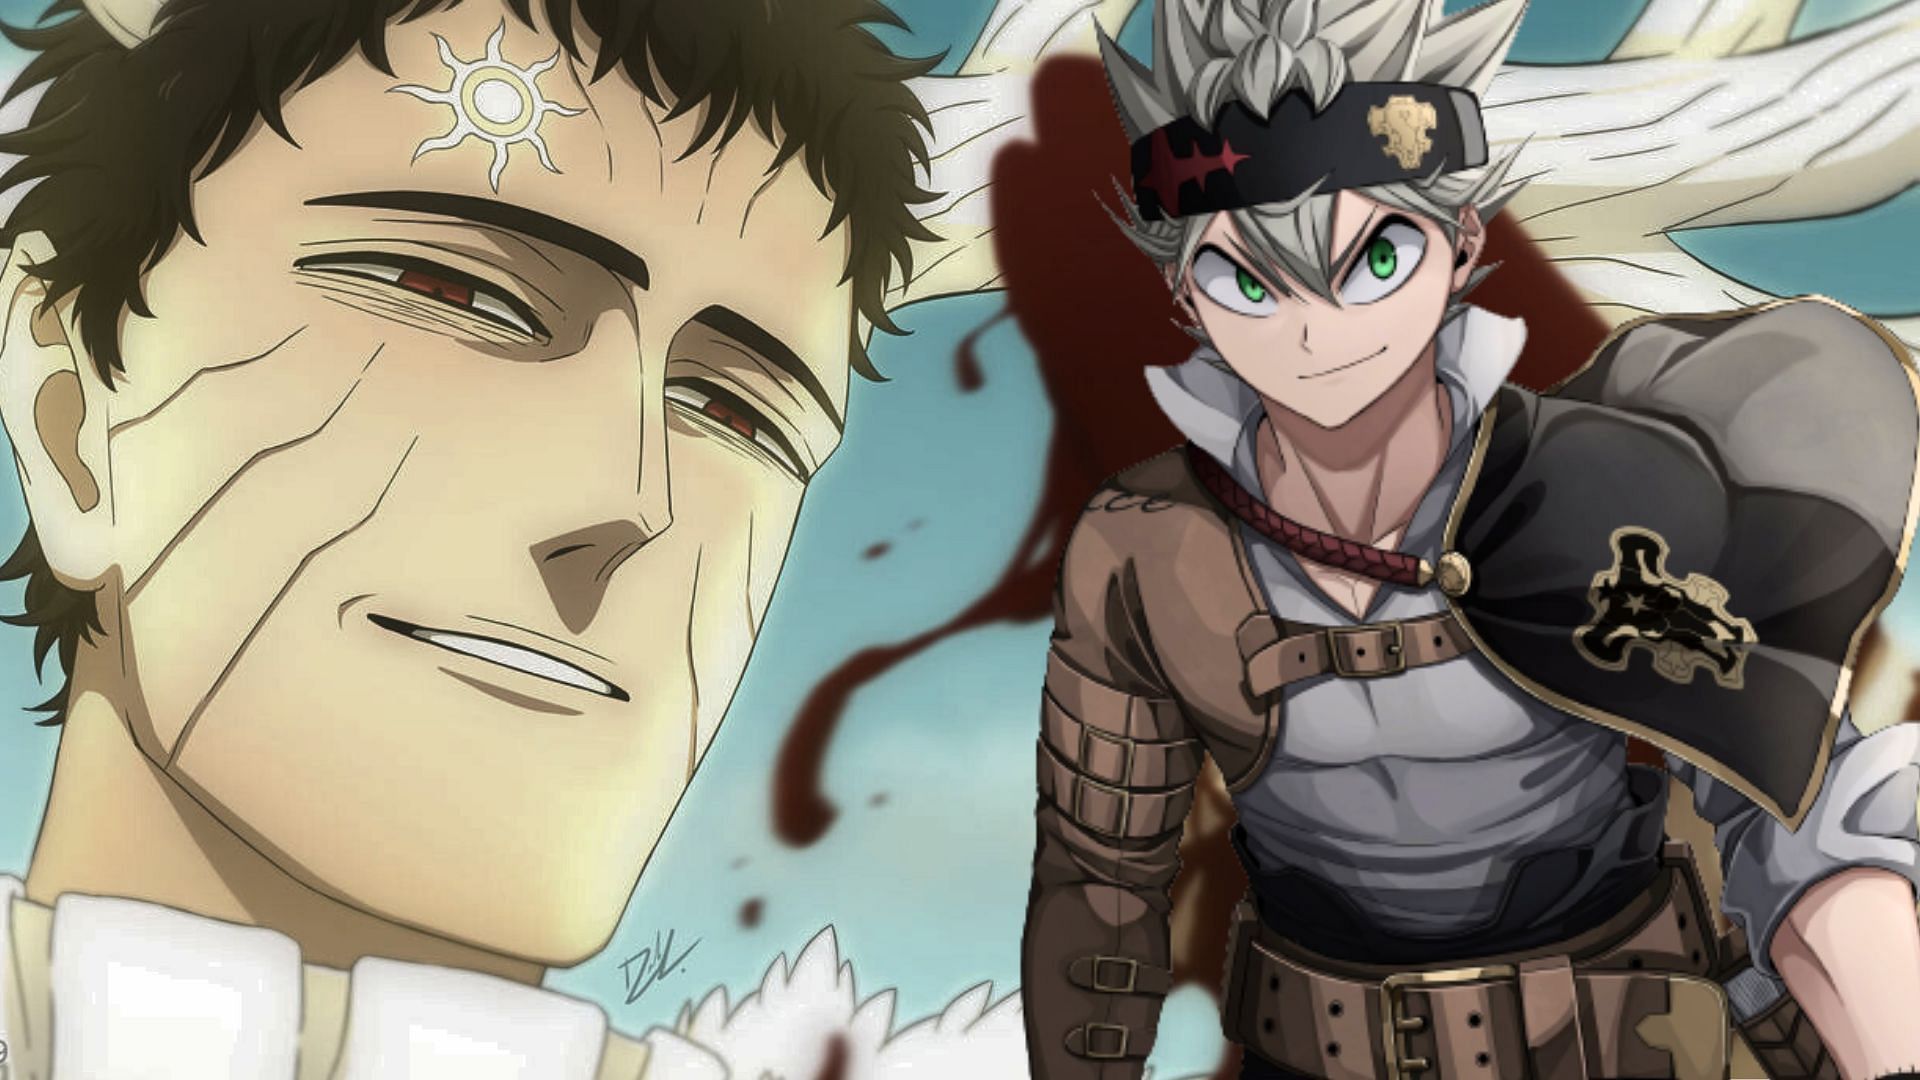 Black Clover: Asta and Yuno and The Boys' Promise review S1 E1 and E2